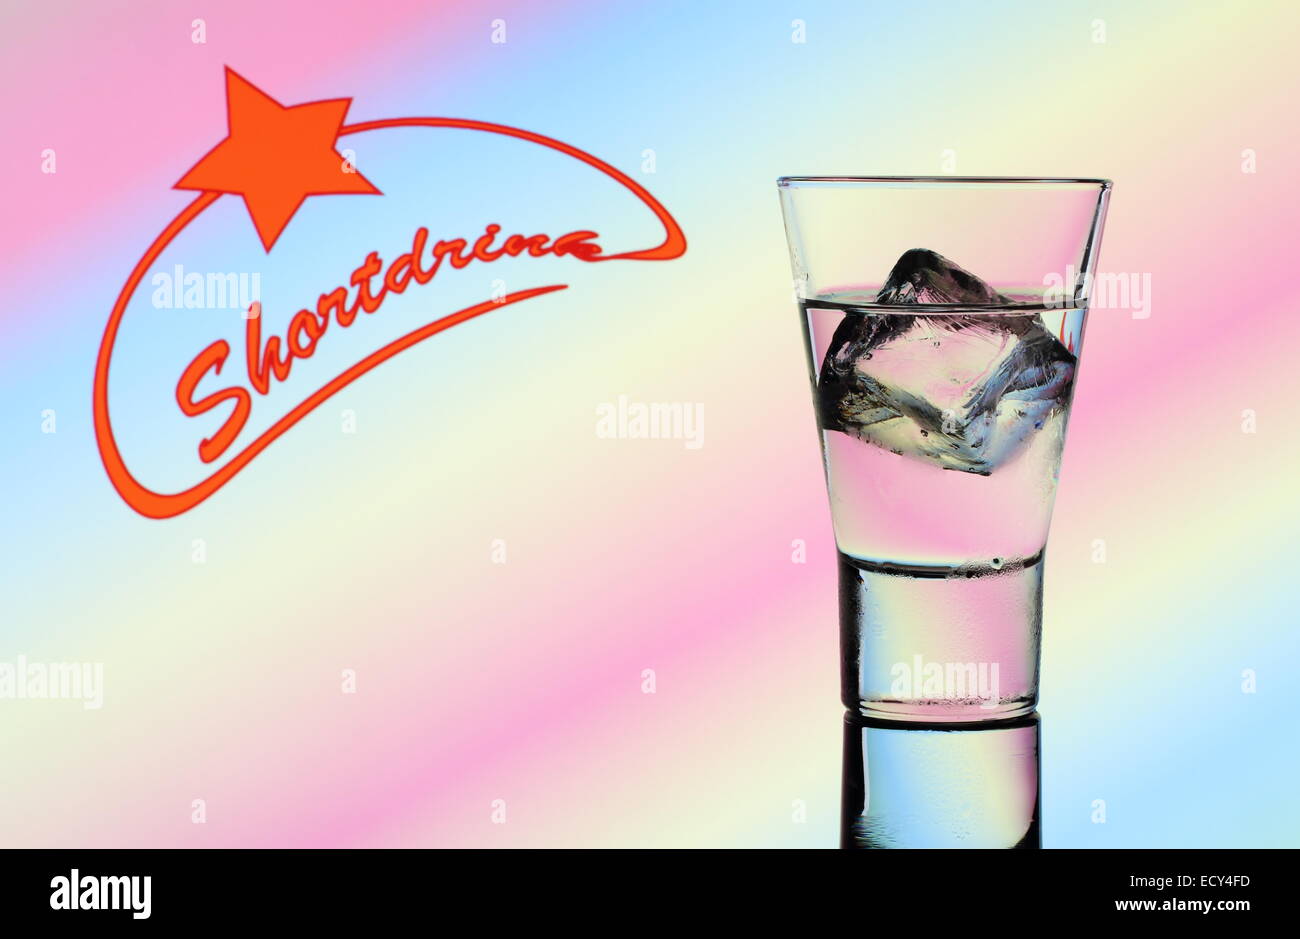 Short drink glass with clear liquid and text, colorful background Stock Photo